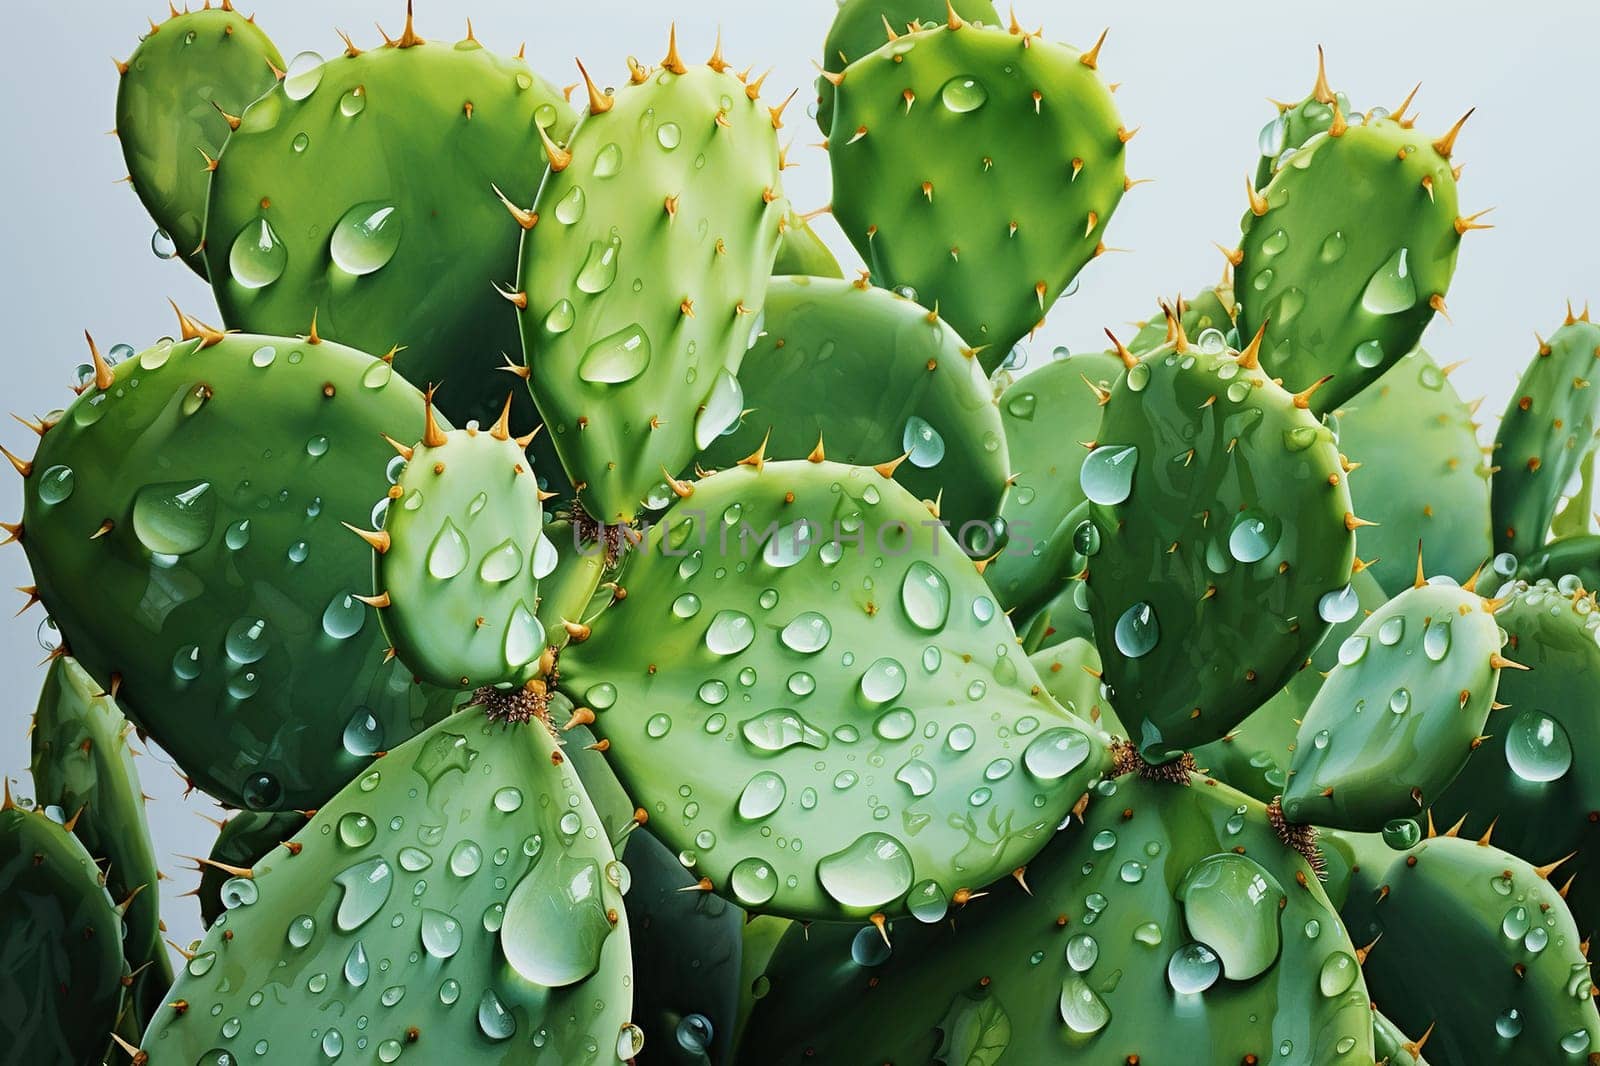 Close-up texture of a cactus with spines in water droplets. Generated by artificial intelligence by Vovmar